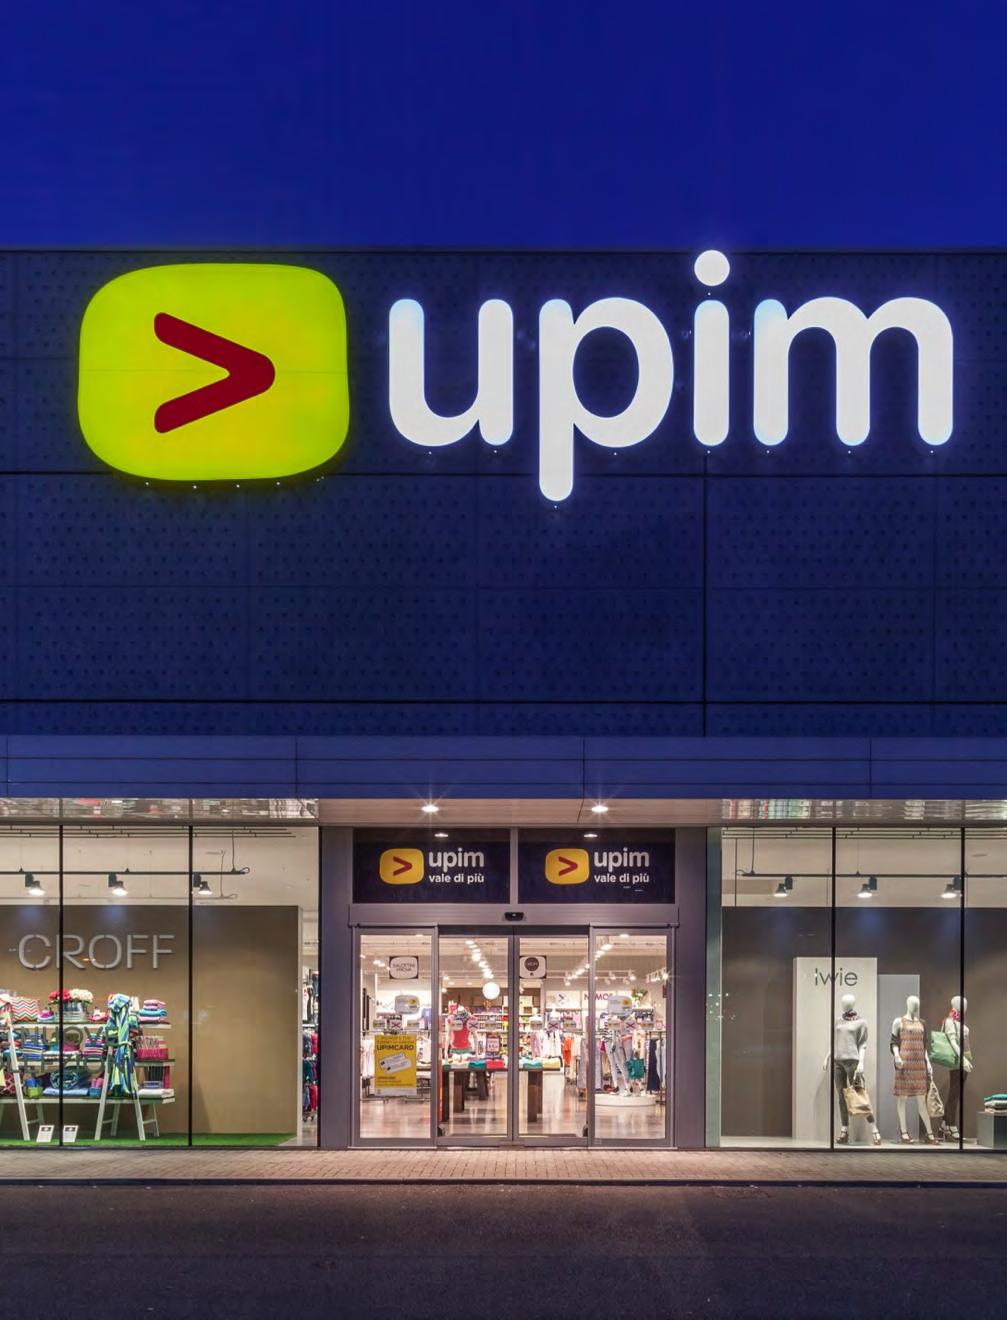 Mission Upim, family value Upim is an everyday low-price department store, a reference point for a